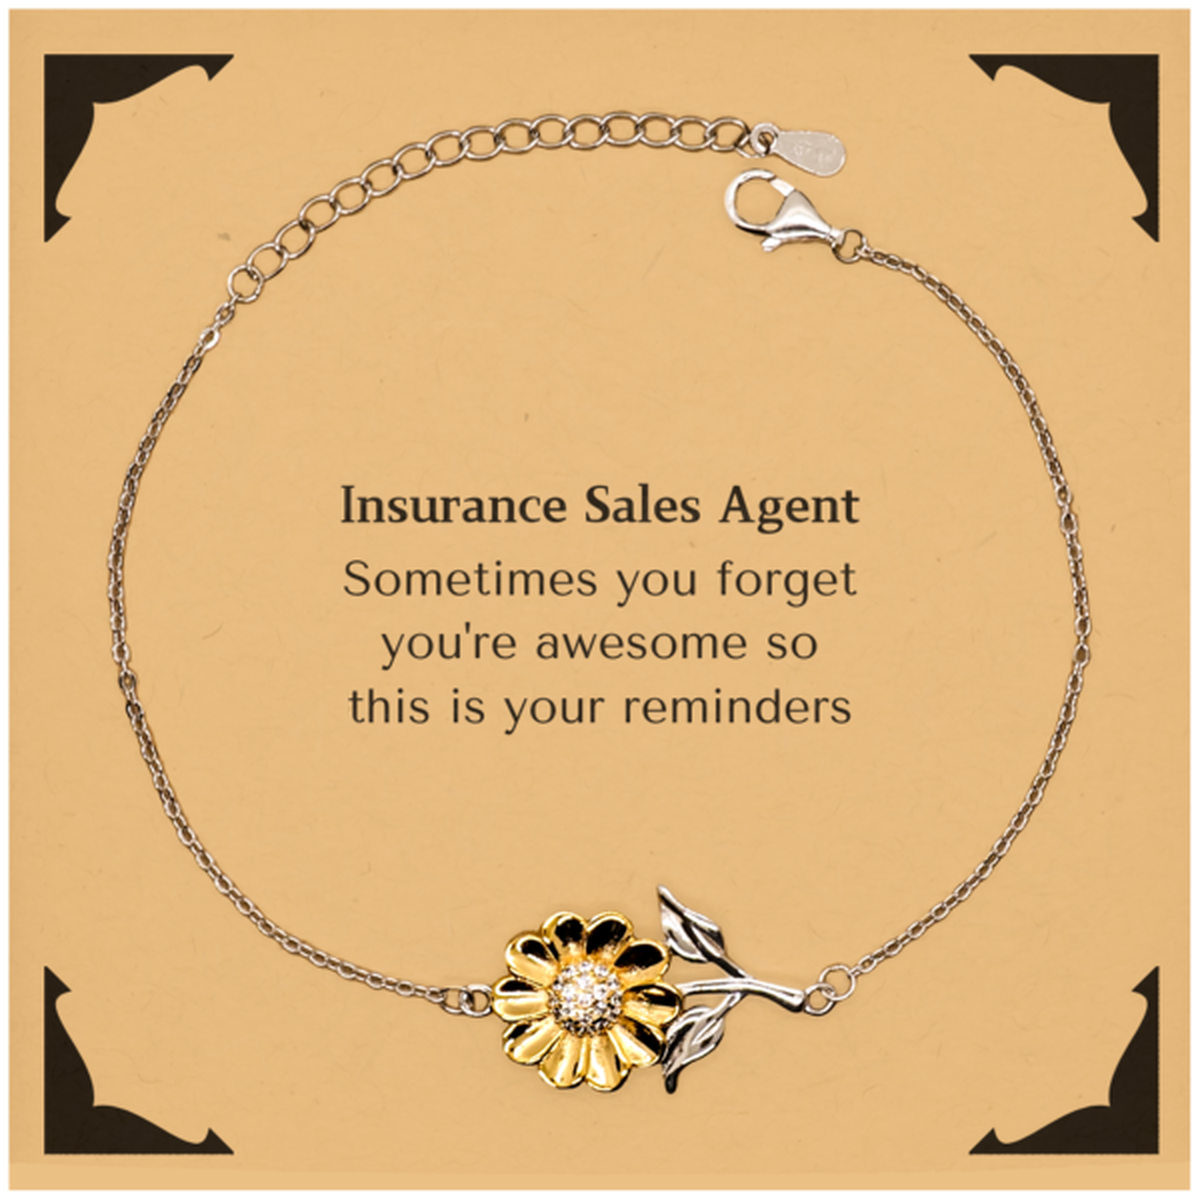 Sentimental Insurance Sales Agent Sunflower Bracelet, Insurance Sales Agent Sometimes you forget you're awesome so this is your reminders, Graduation Christmas Birthday Gifts for Insurance Sales Agent, Men, Women, Coworkers